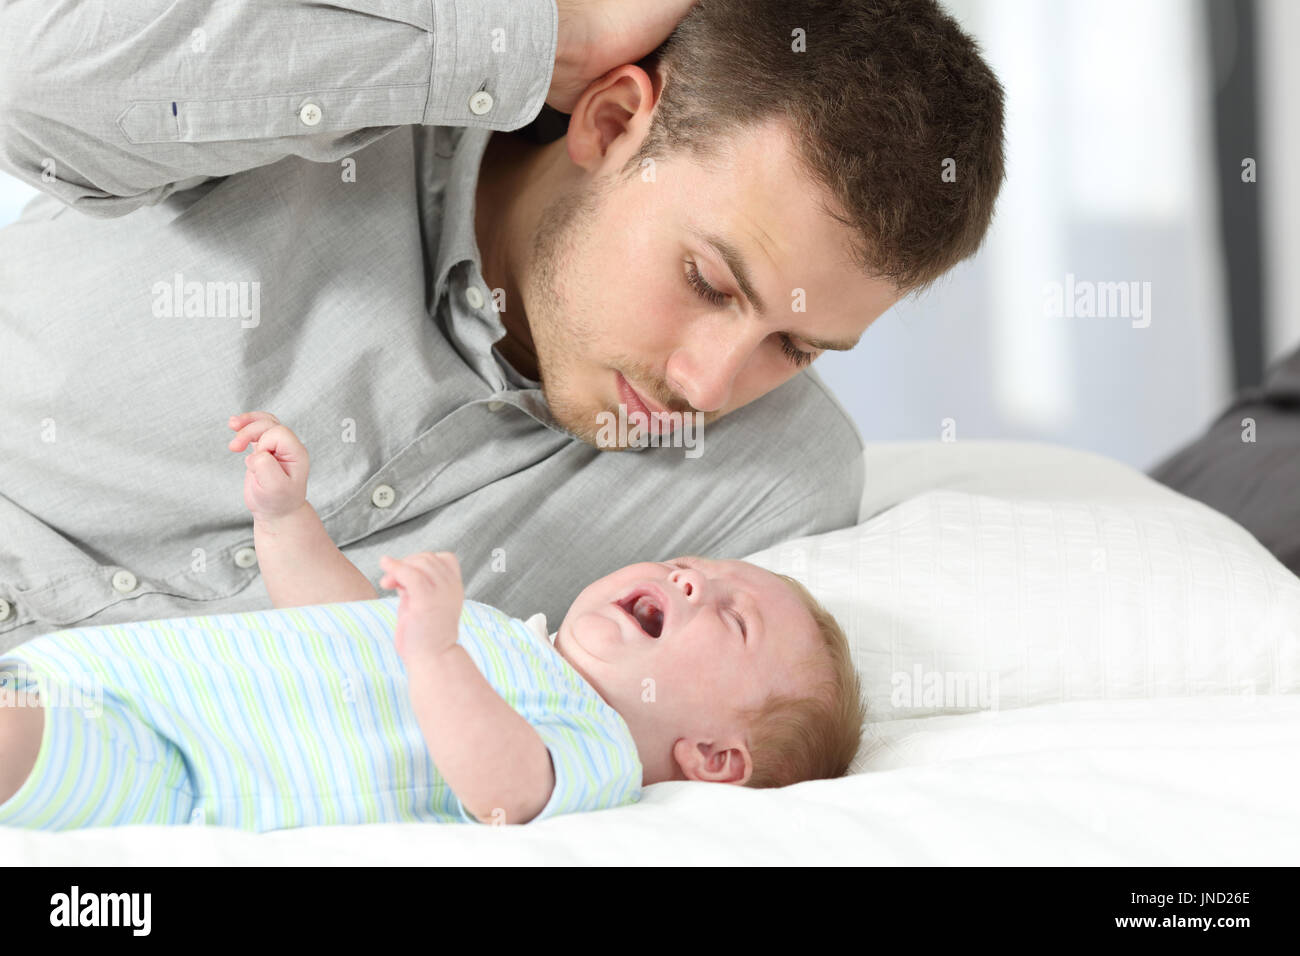 Confused father watching his baby son crying desperately on a bed Stock Photo